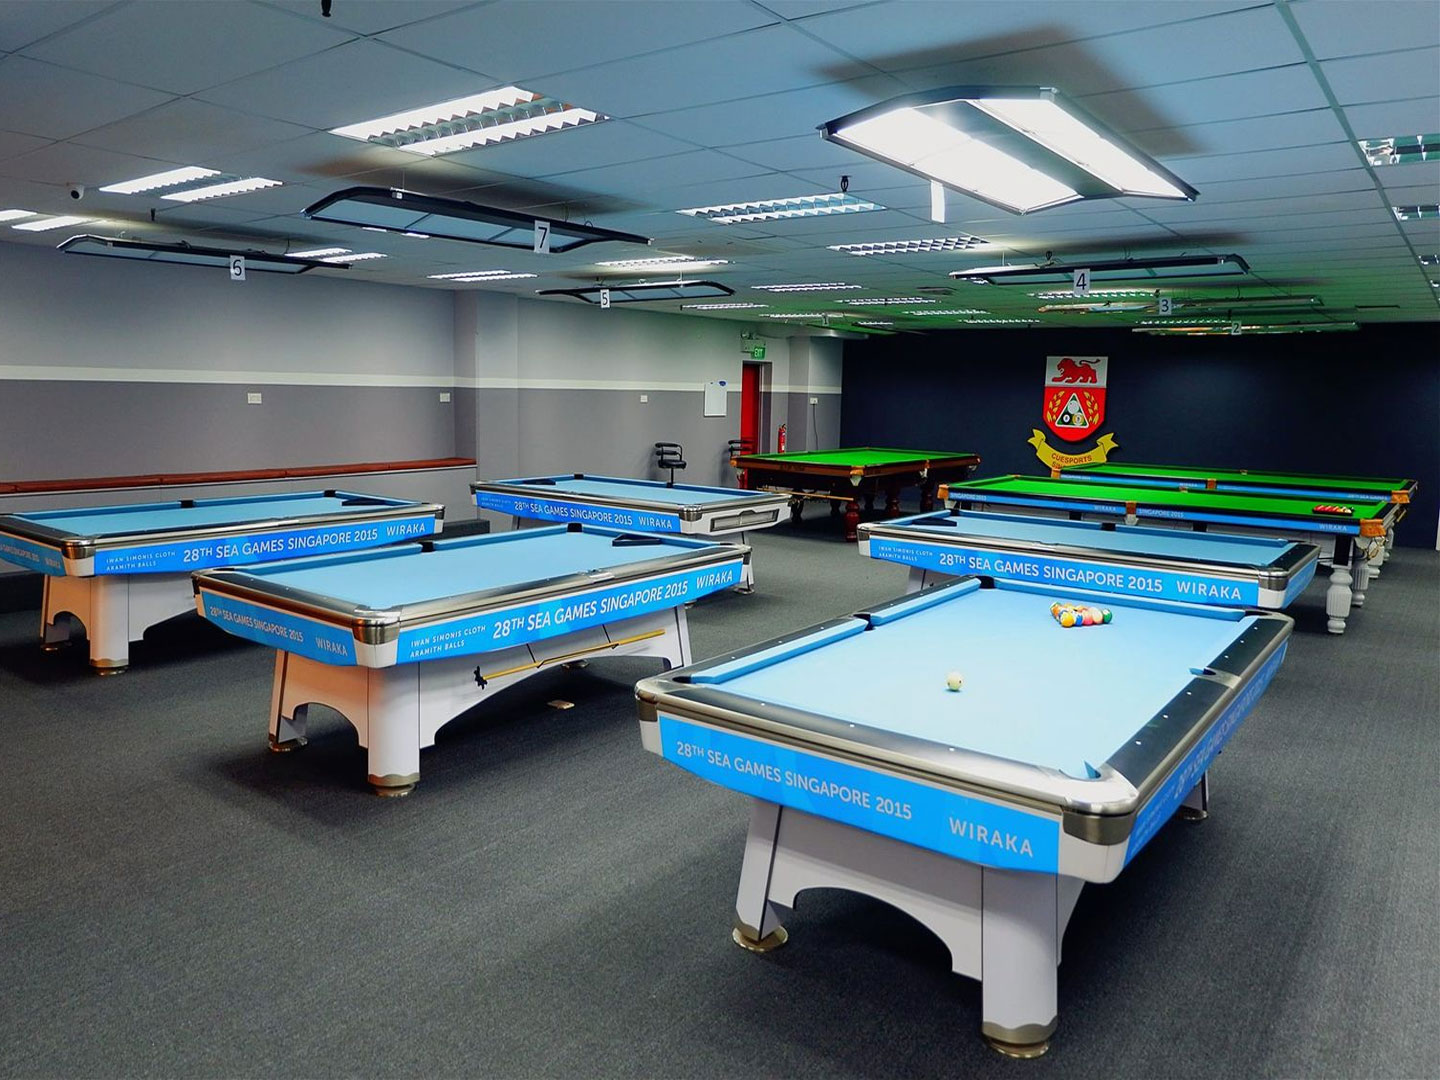 12 minutes drive from Gems Ville to Cuesports Singapore Academy